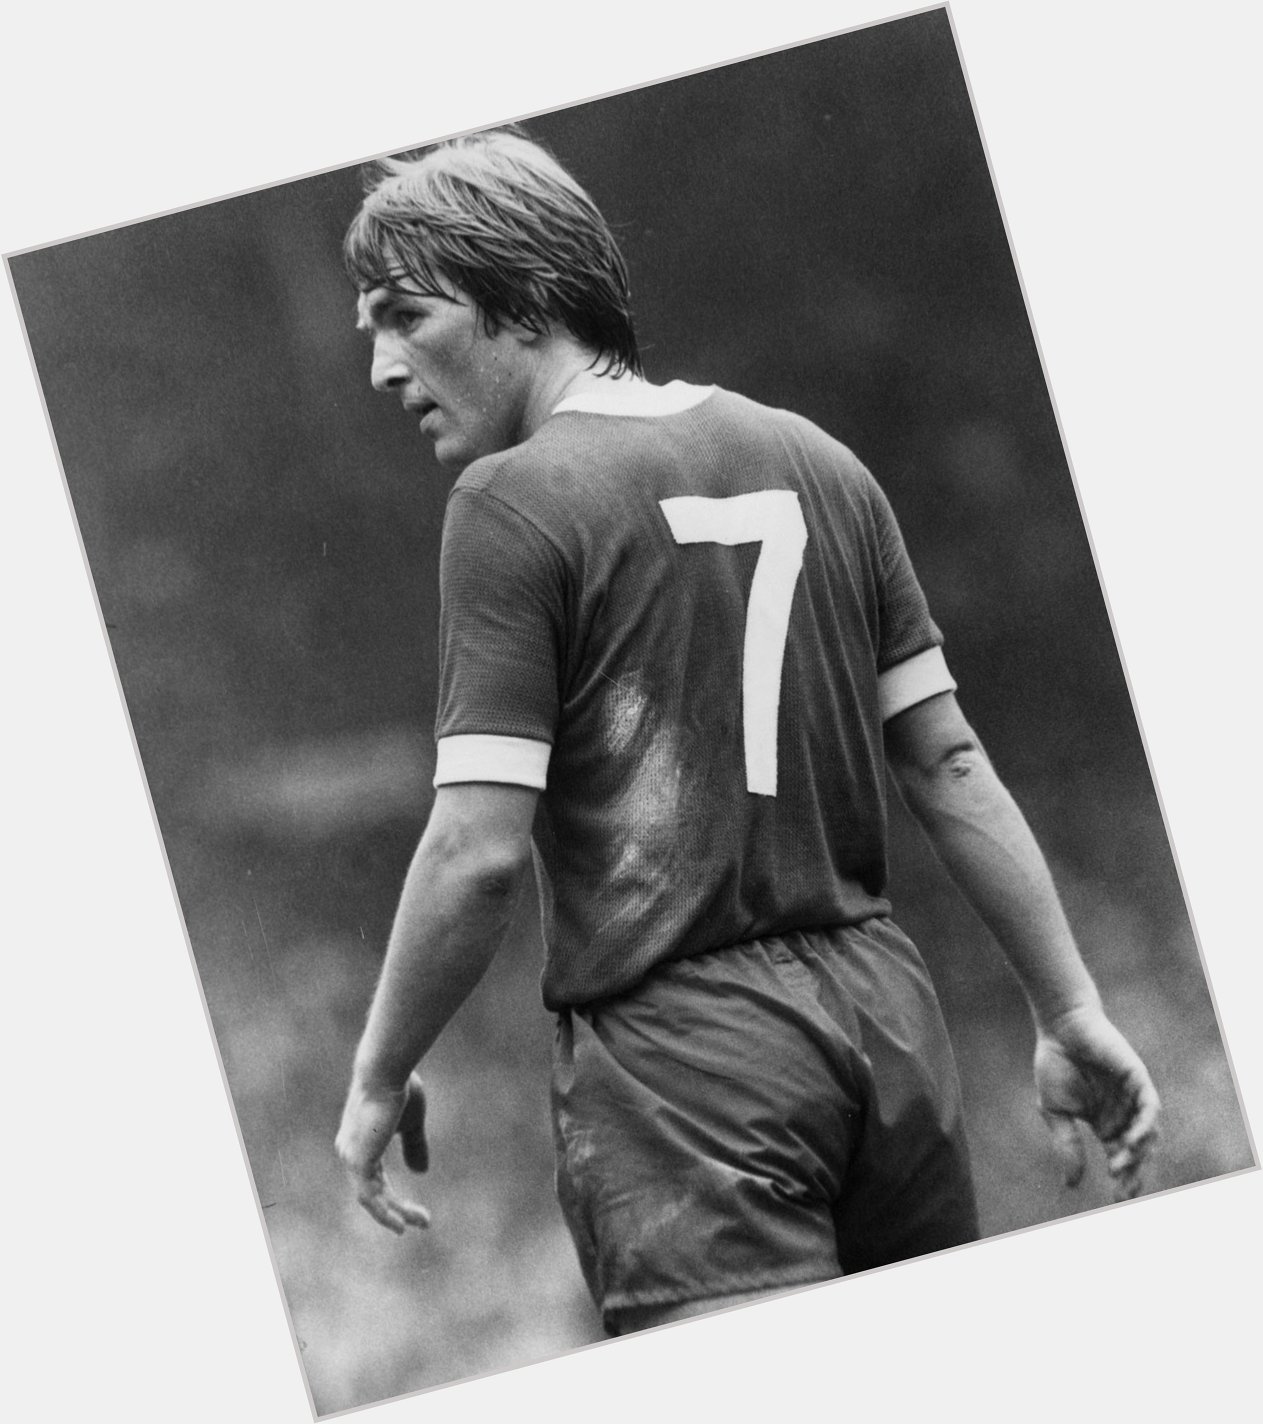 With Kenny Dalglish on the ball. He was the greatest of them all! Happy birthday  